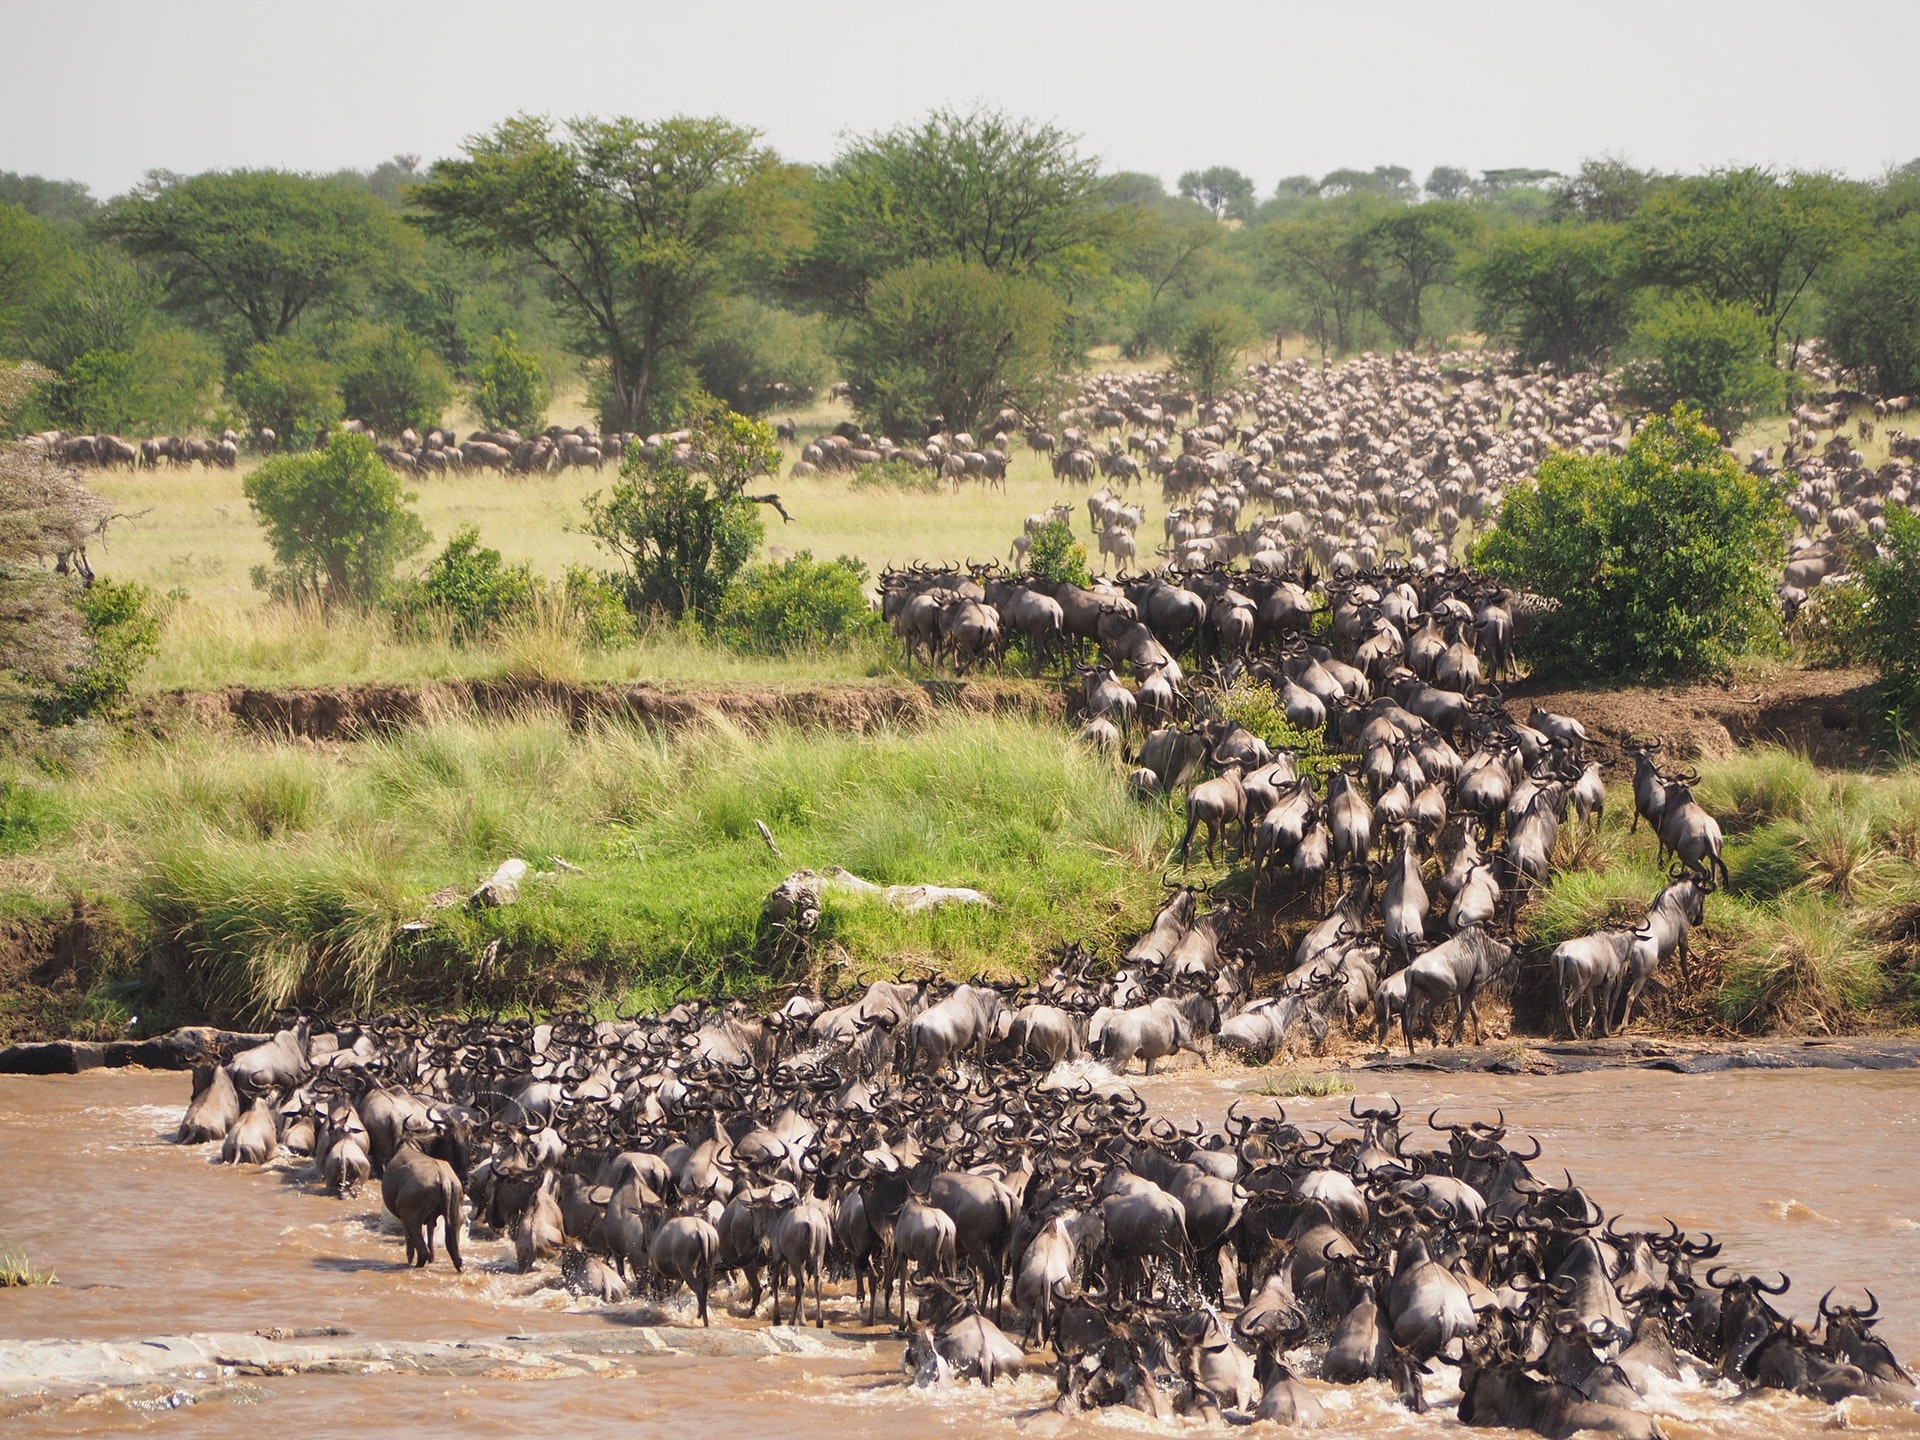 Thanks to these cloven-hoofed carbon experts, the Serengeti now takes up an additional 8 million tons of carbon annually. Image: Great wildebeest migration crossing Mara river at Serengeti National Park - Tanzania.